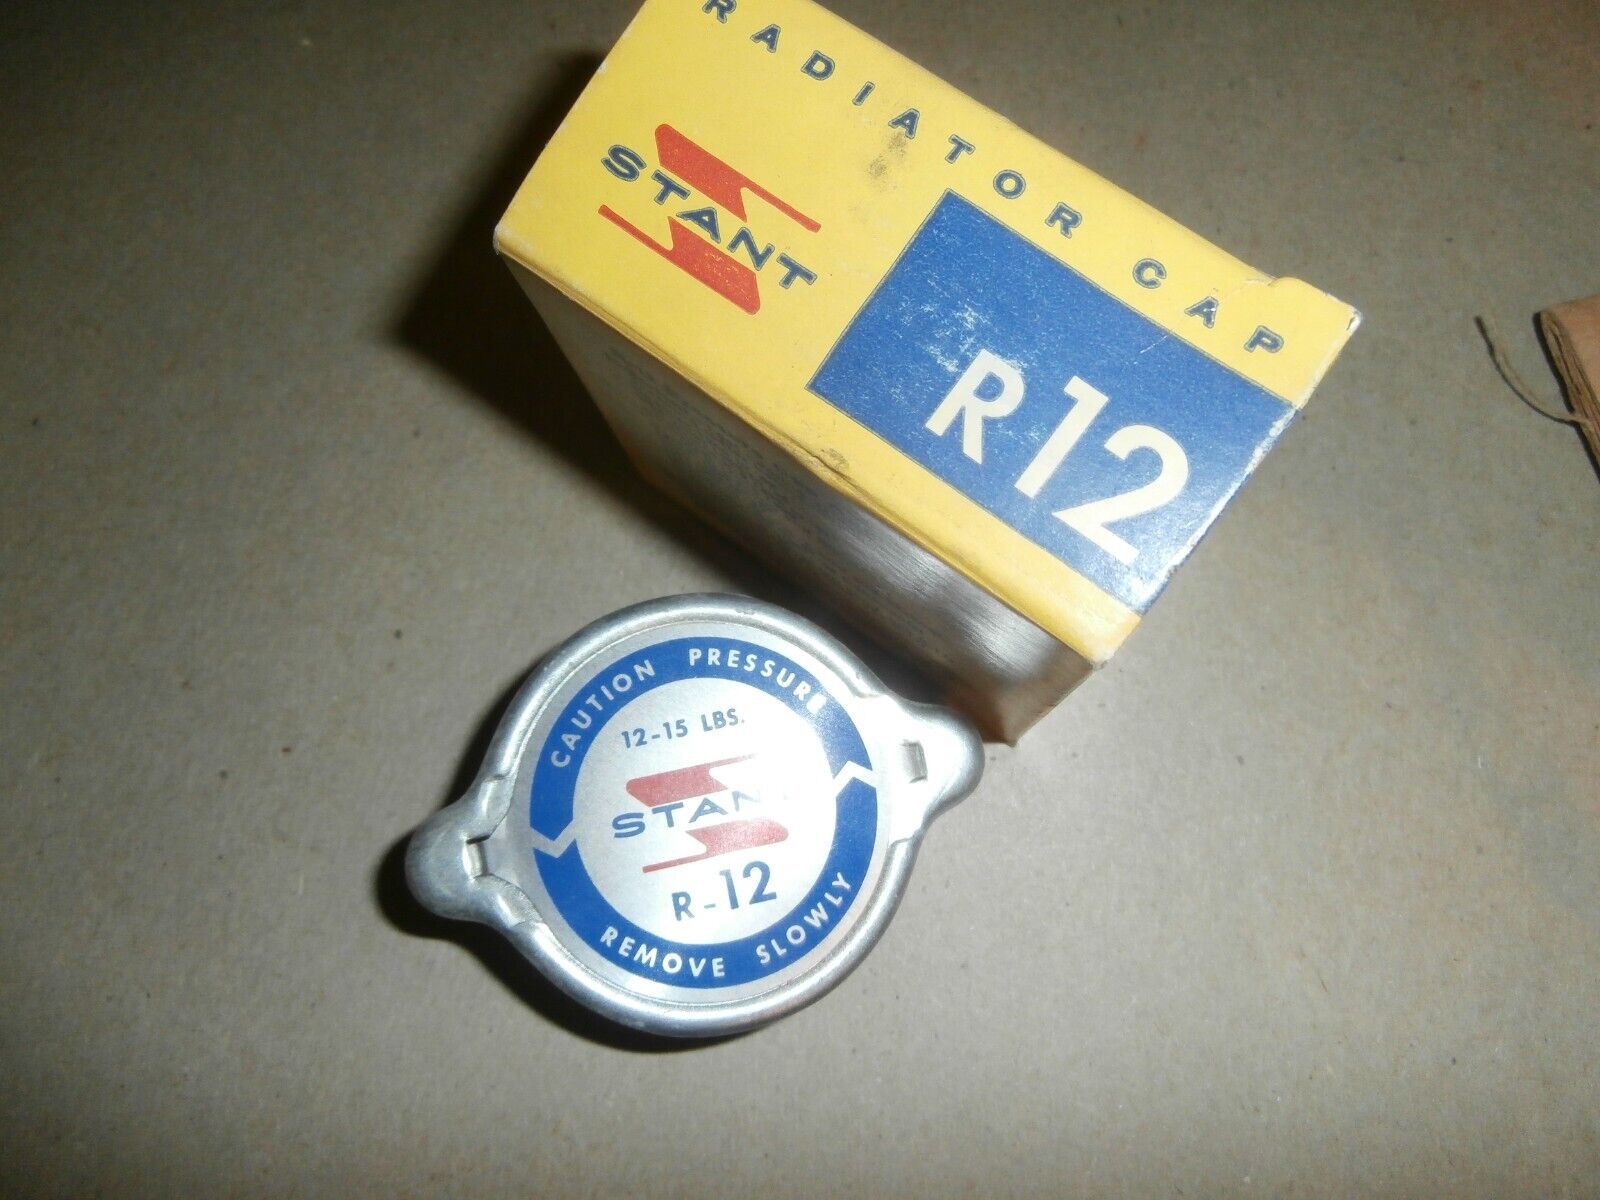 NOS Stant R12 Box Radiator Cap 1958 - 1962 Chevy 1955 - 62 Ford 1961 Willys ect